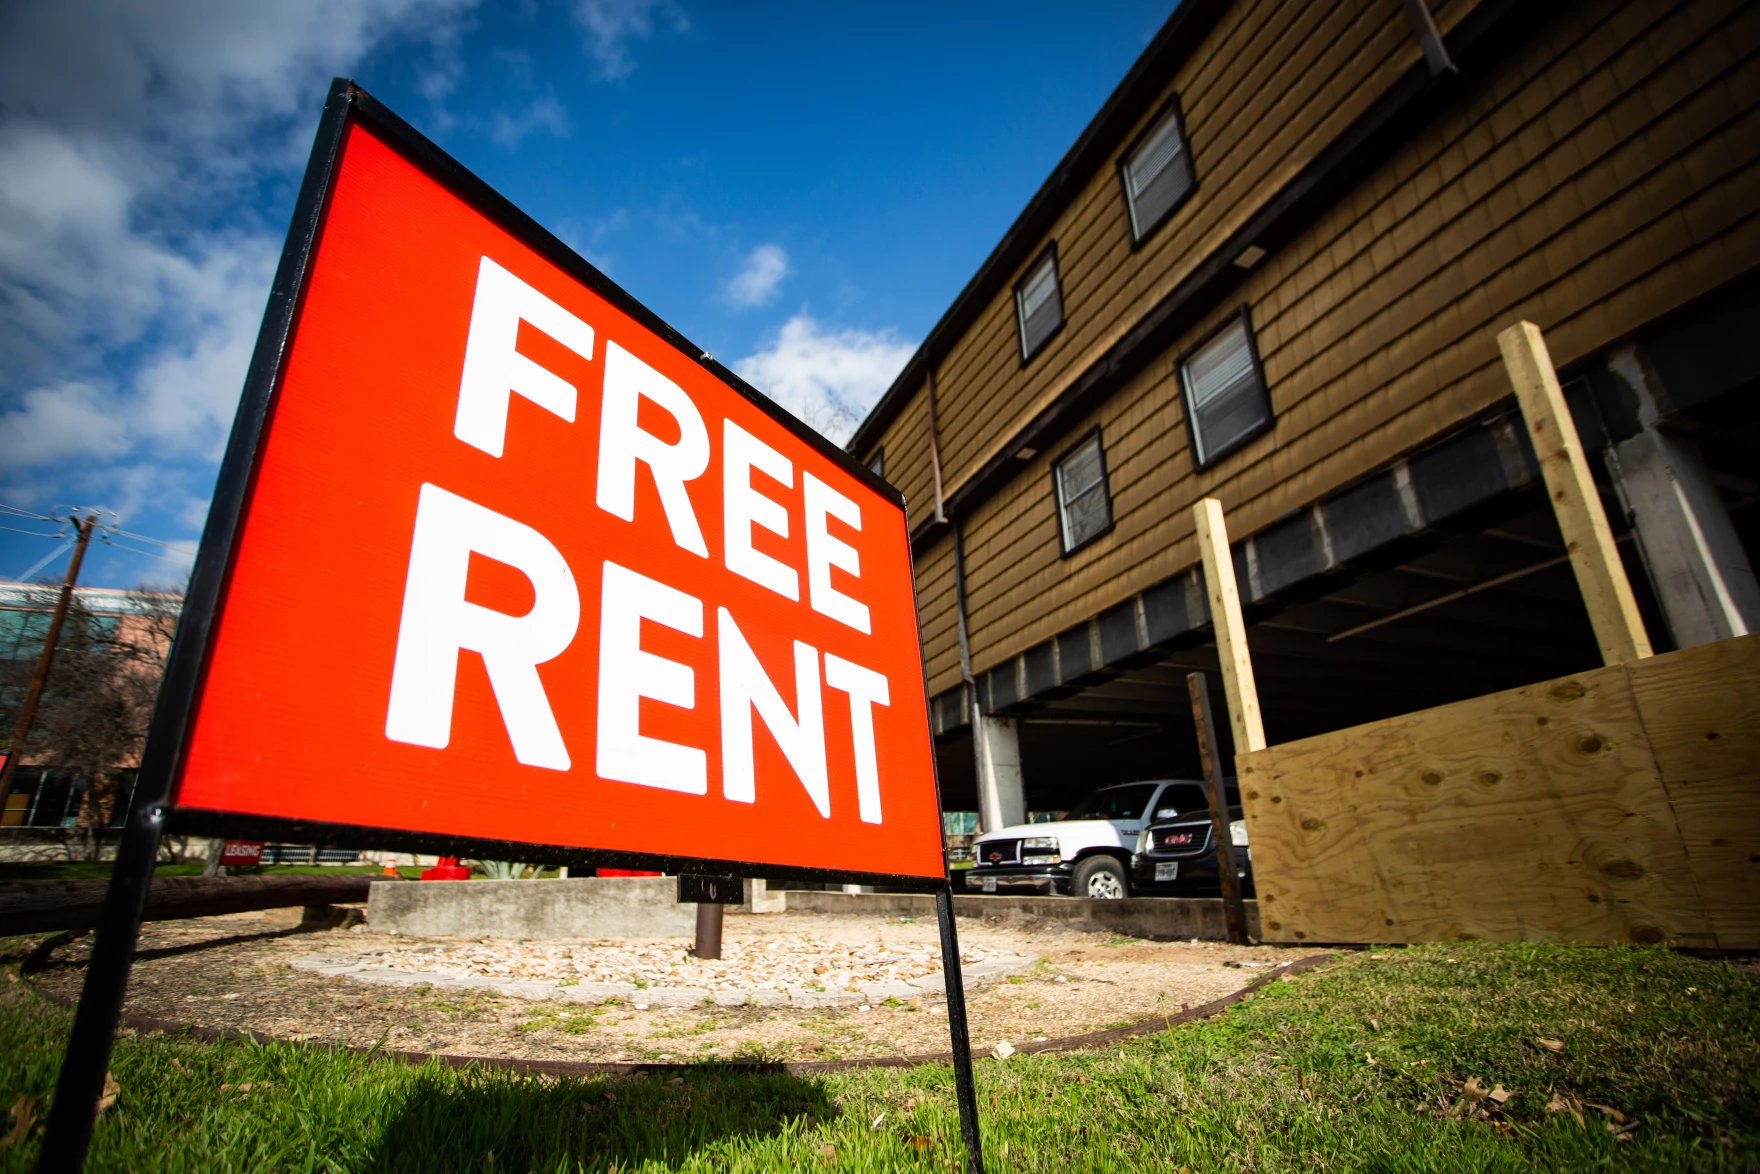 $1,700, $2,900, $3,200 a month? What’s the real cost of rent in Austin?